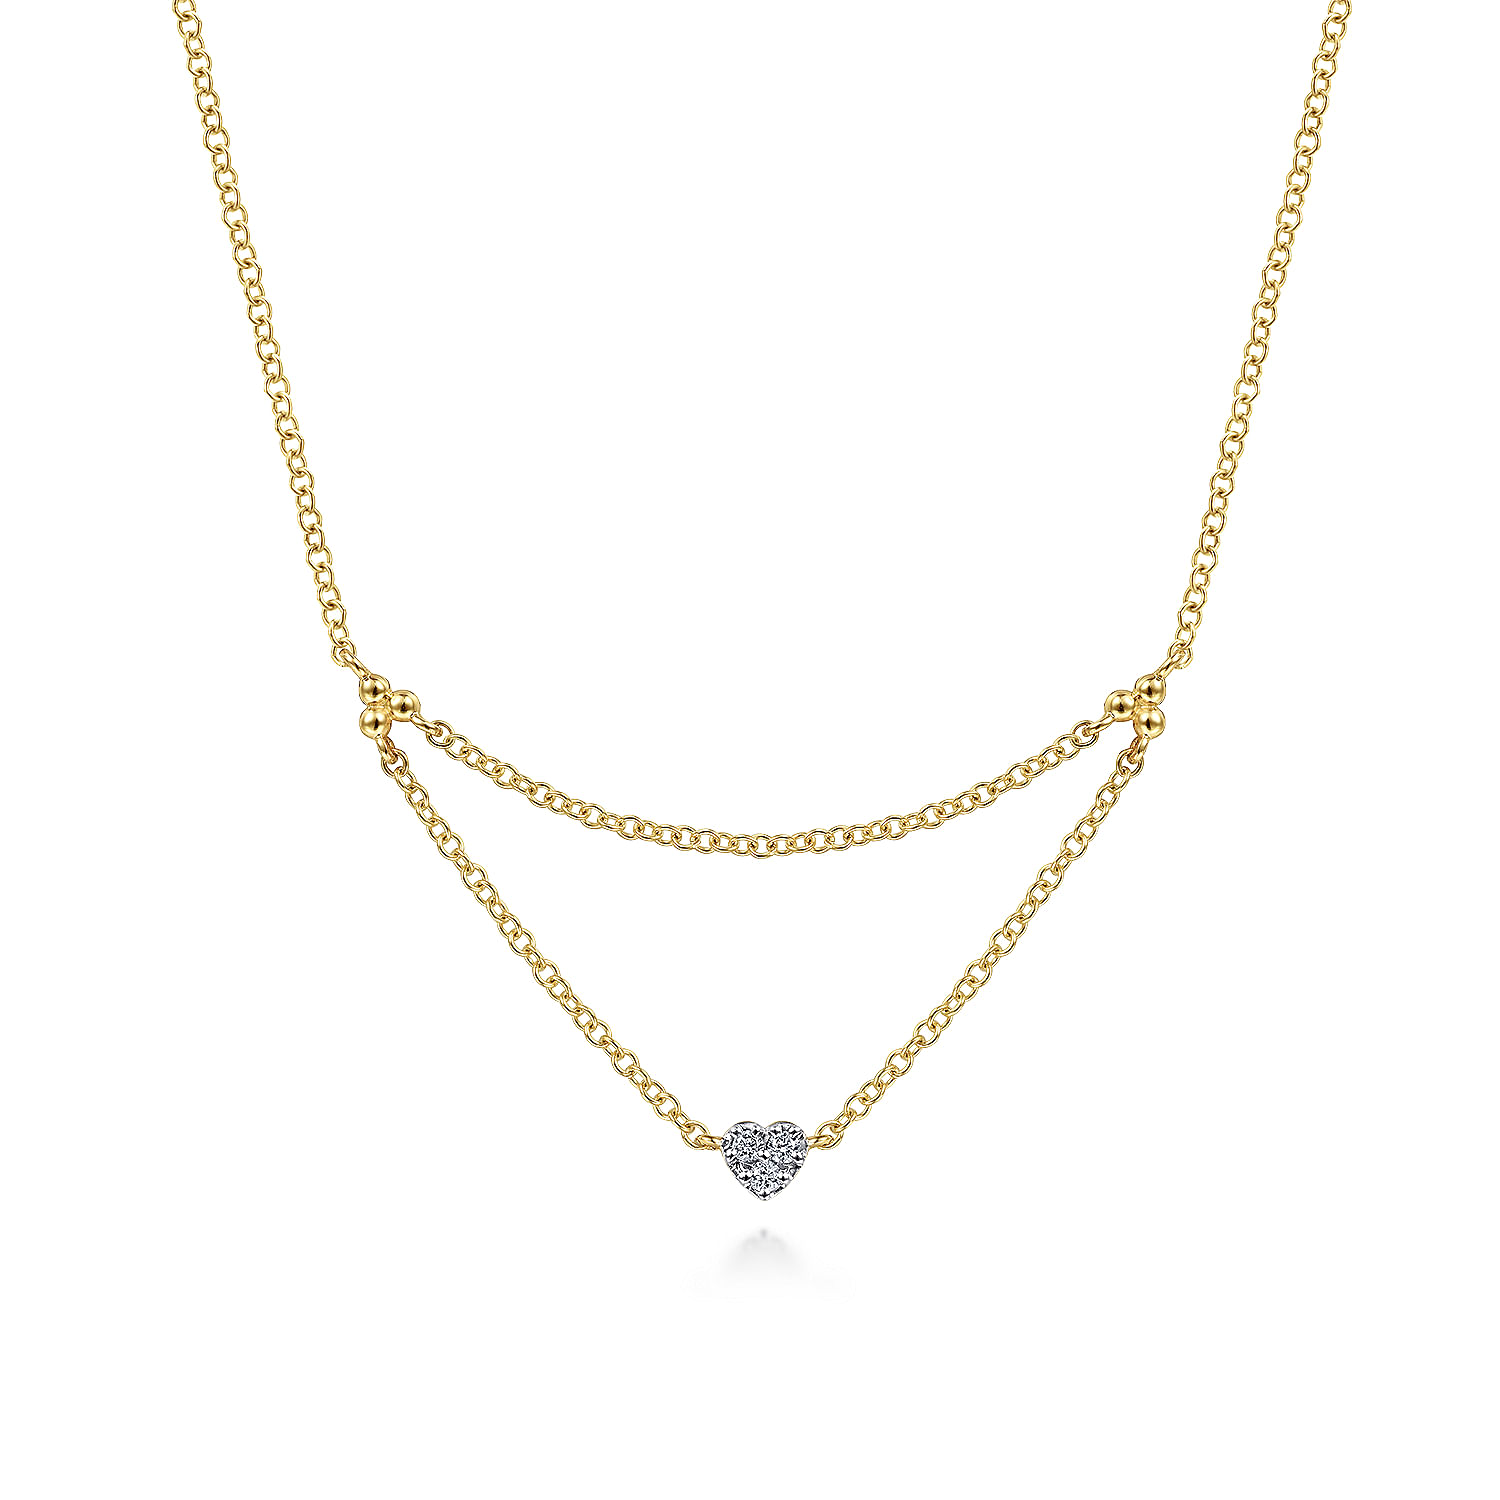 14K Yellow Gold Triangular Chain Necklace with Pavé Diamond Heart